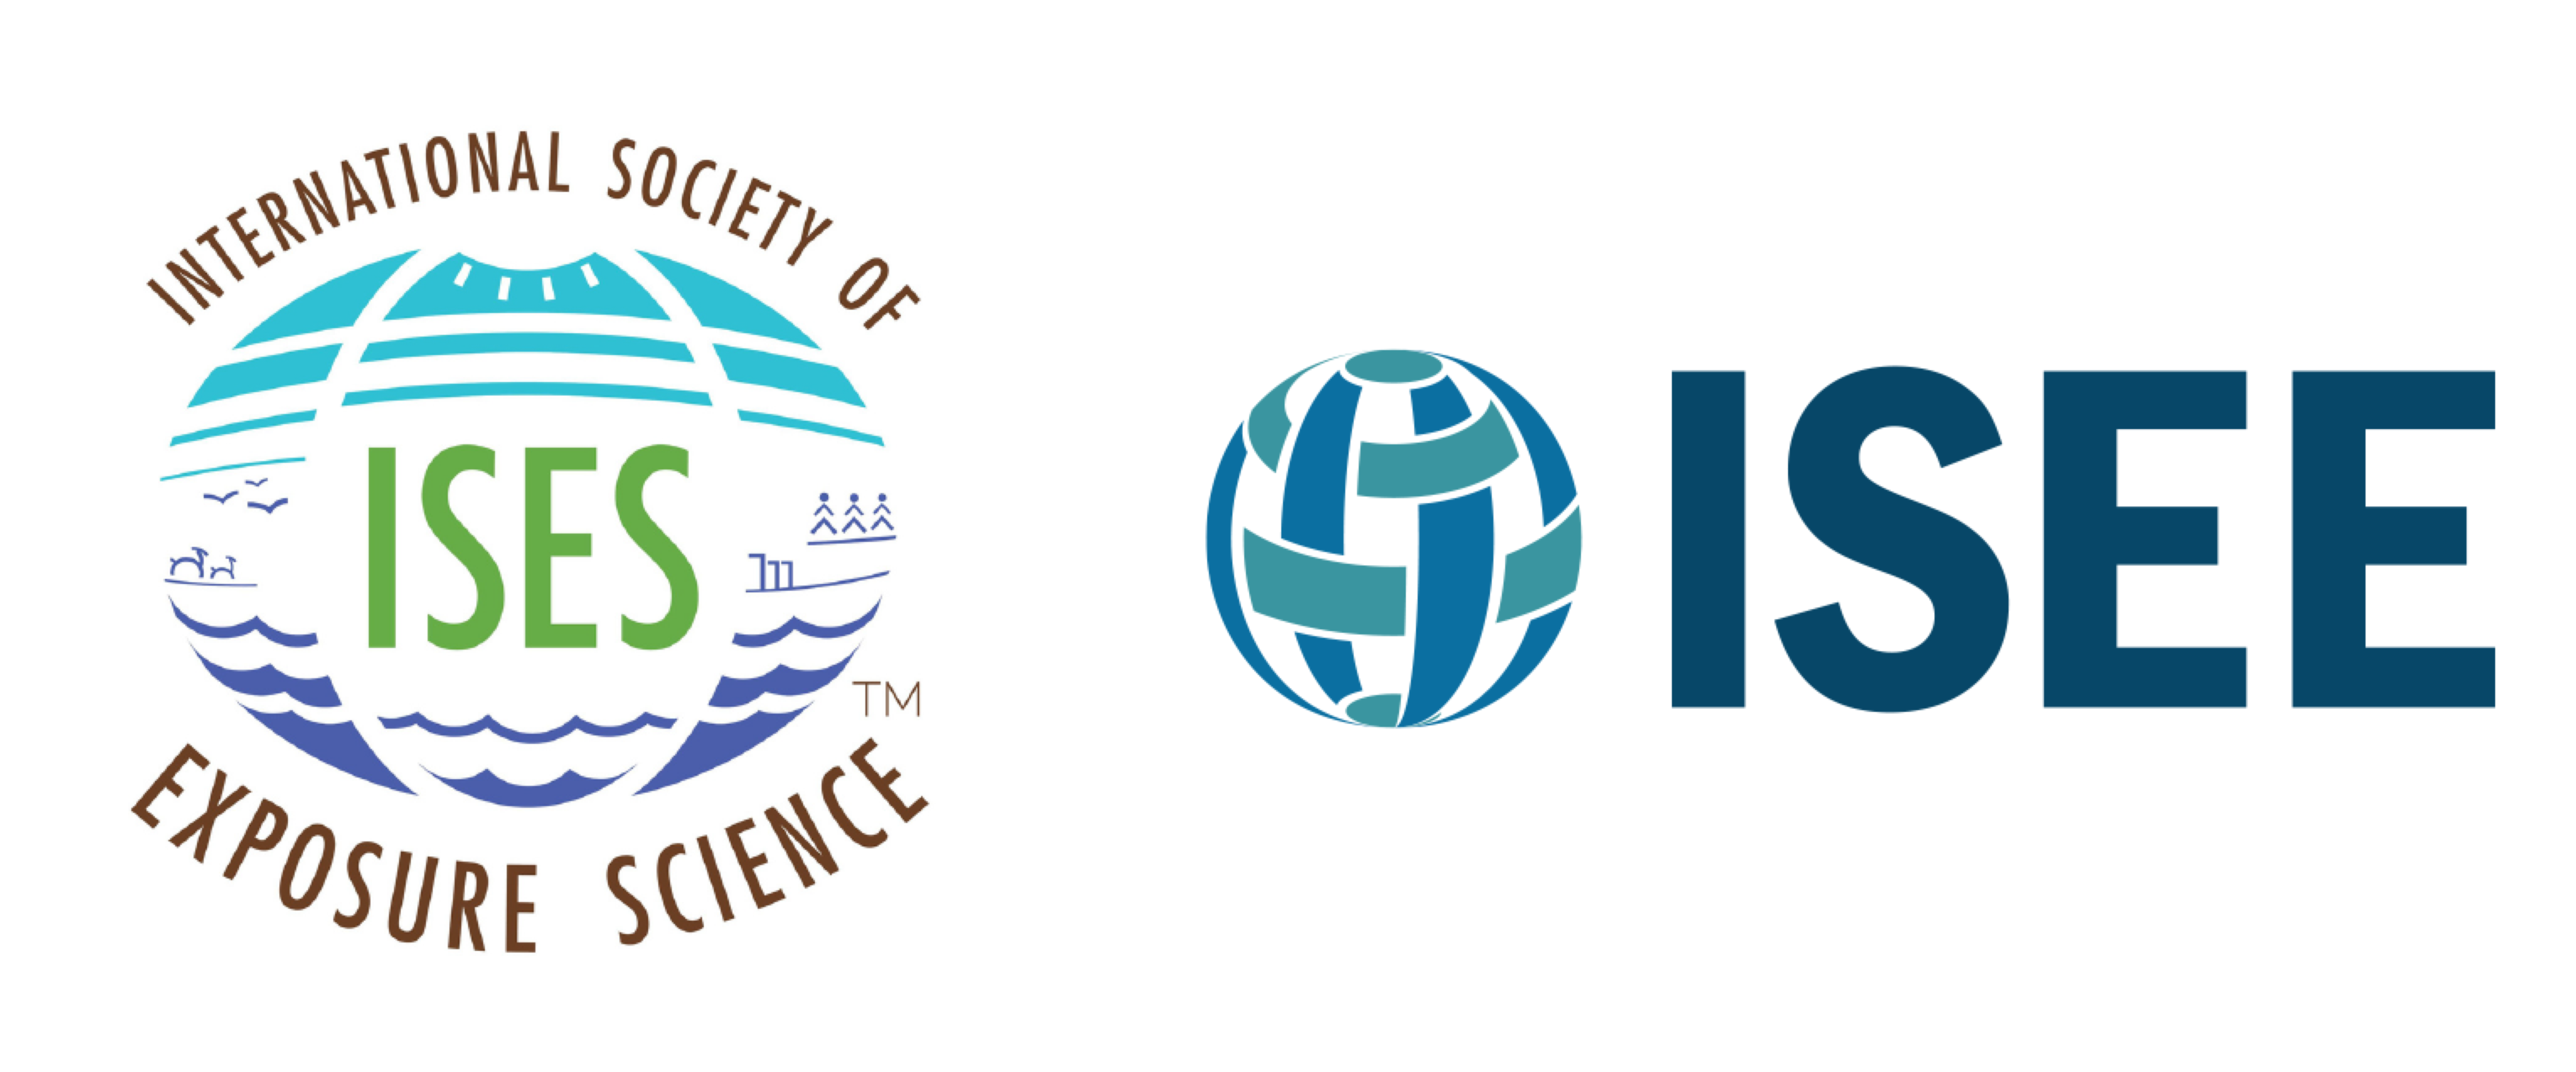 Logos of ISES and ISEE